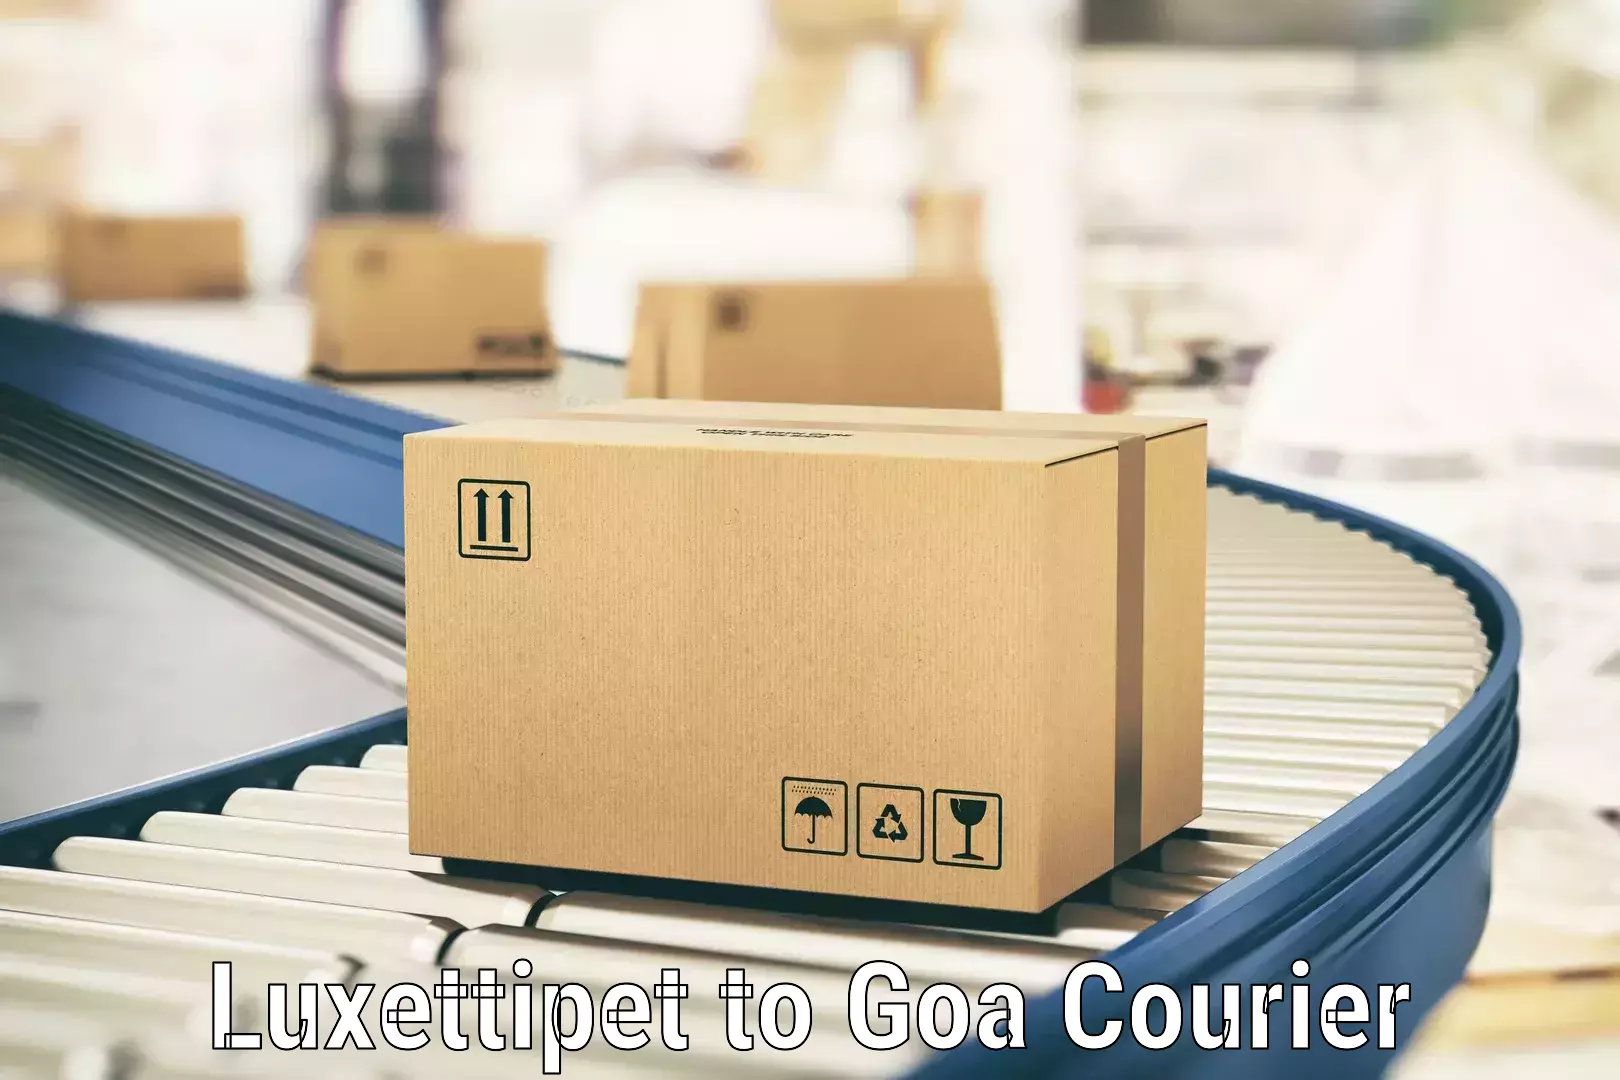 Advanced shipping technology in Luxettipet to Goa